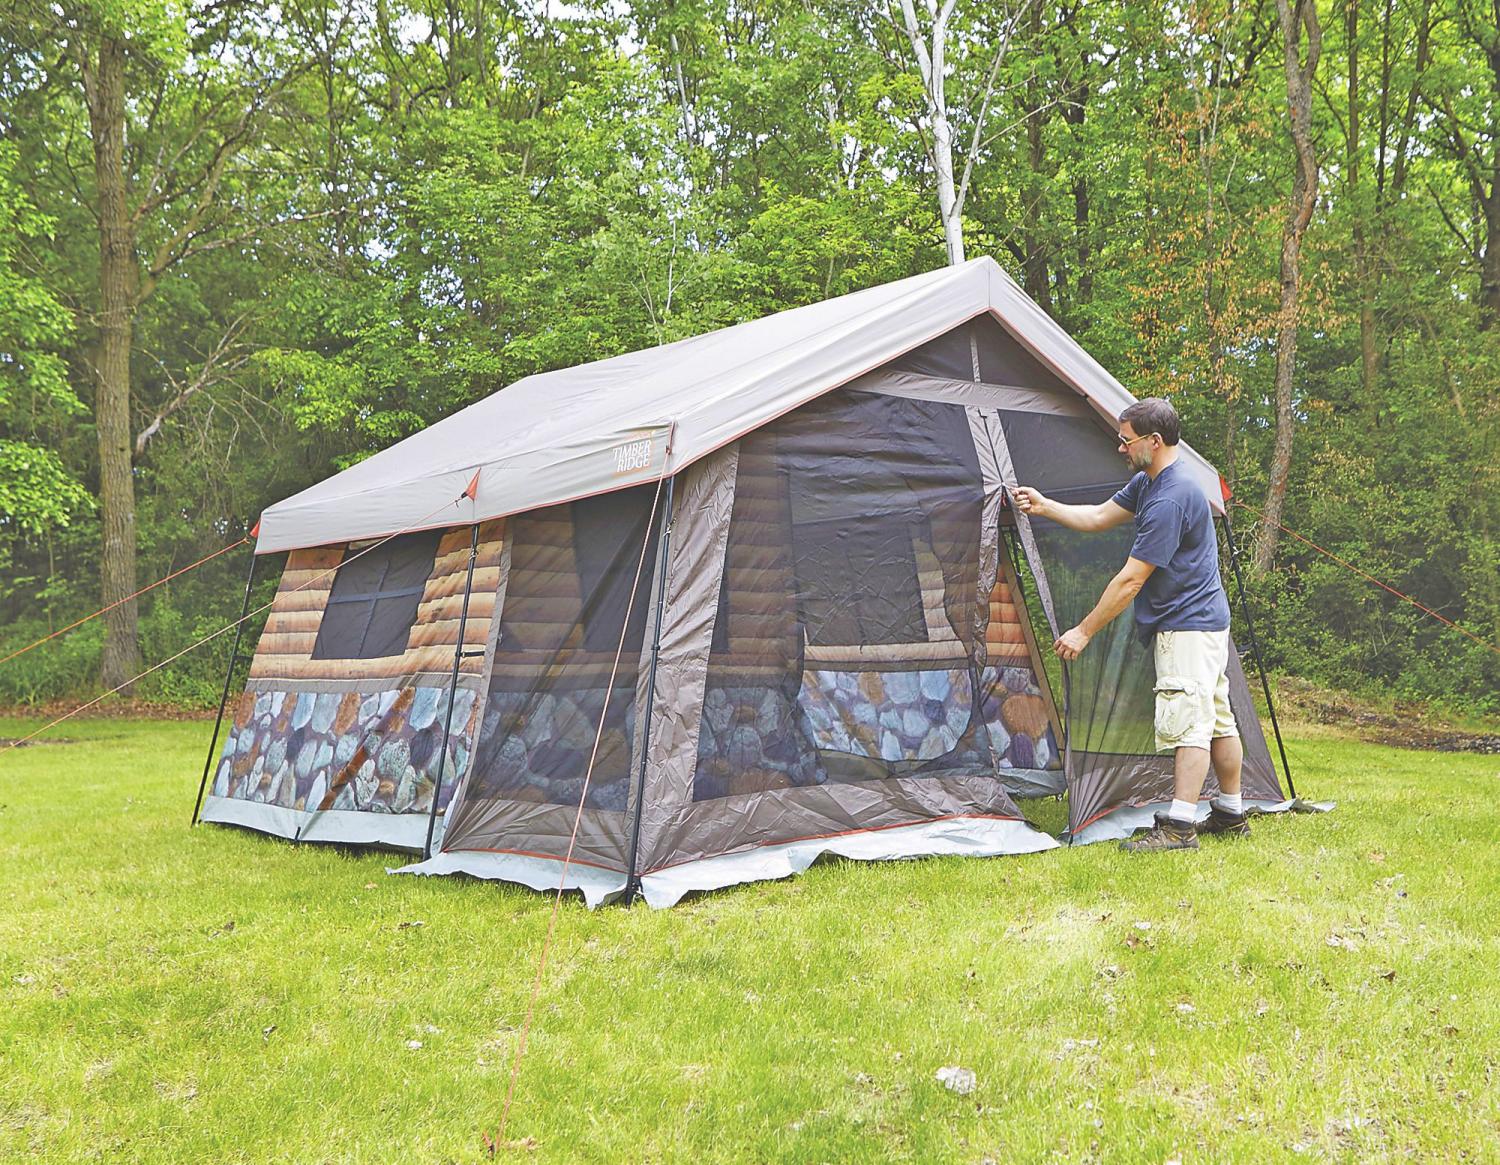 This Log Cabin Tent Has a Giant Screened In Front Porch For a True